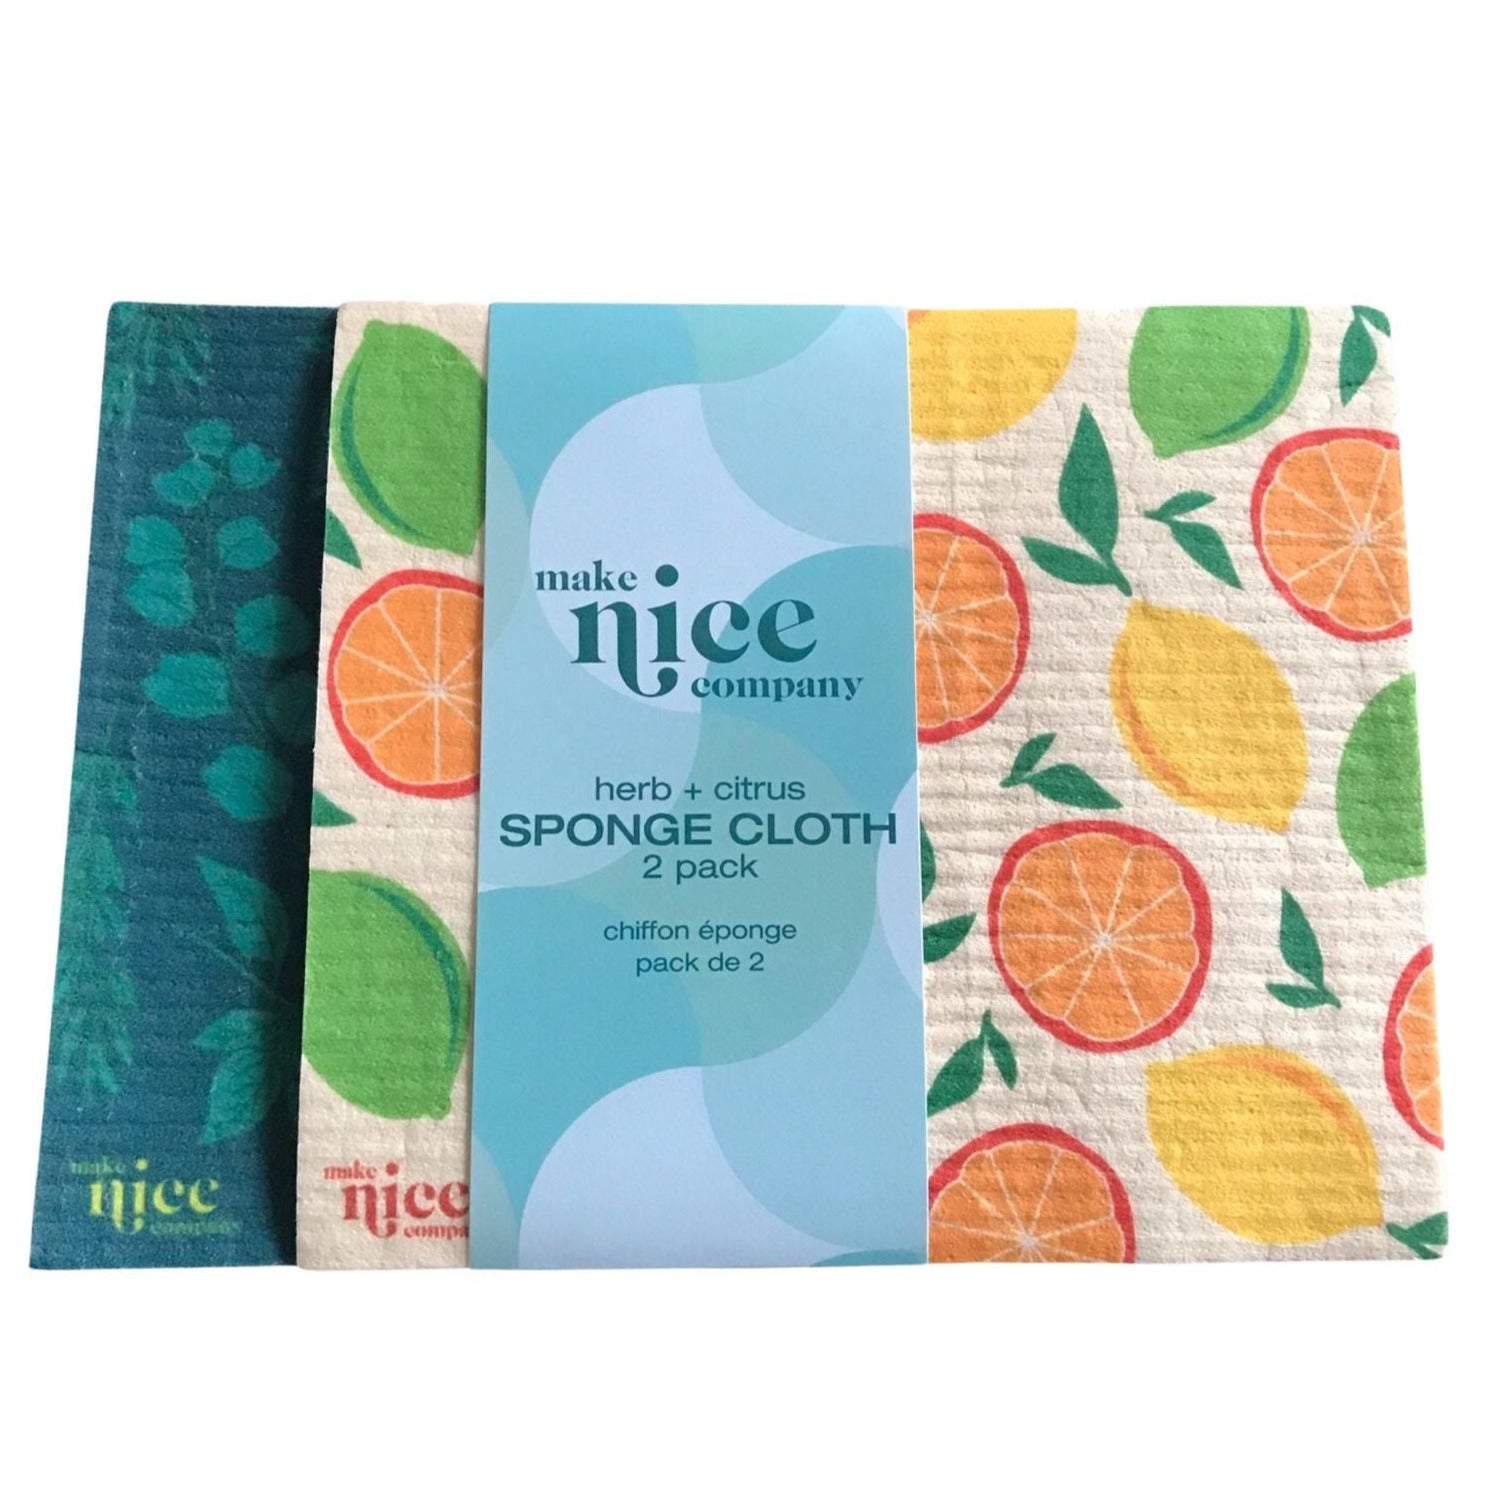 Made with cellulose wood pulp, this herb and citrus sponge cloth set of 2 is quick drying and naturally anti-bacterial making it a great tool for cleaning around your kitchen and drying dishes without leaving streaks or scratches